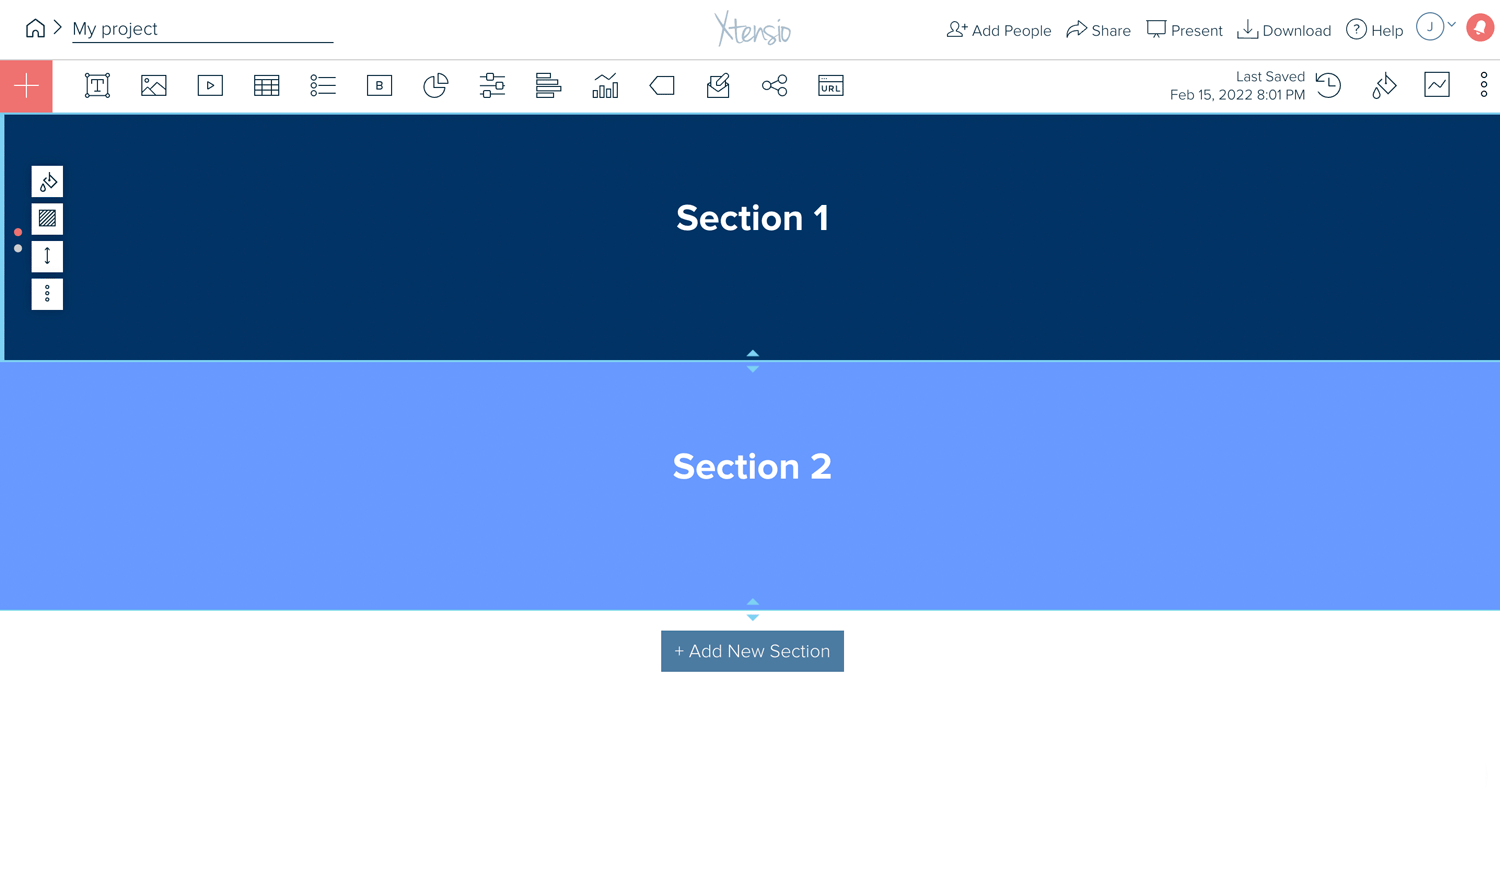 Working with Sections